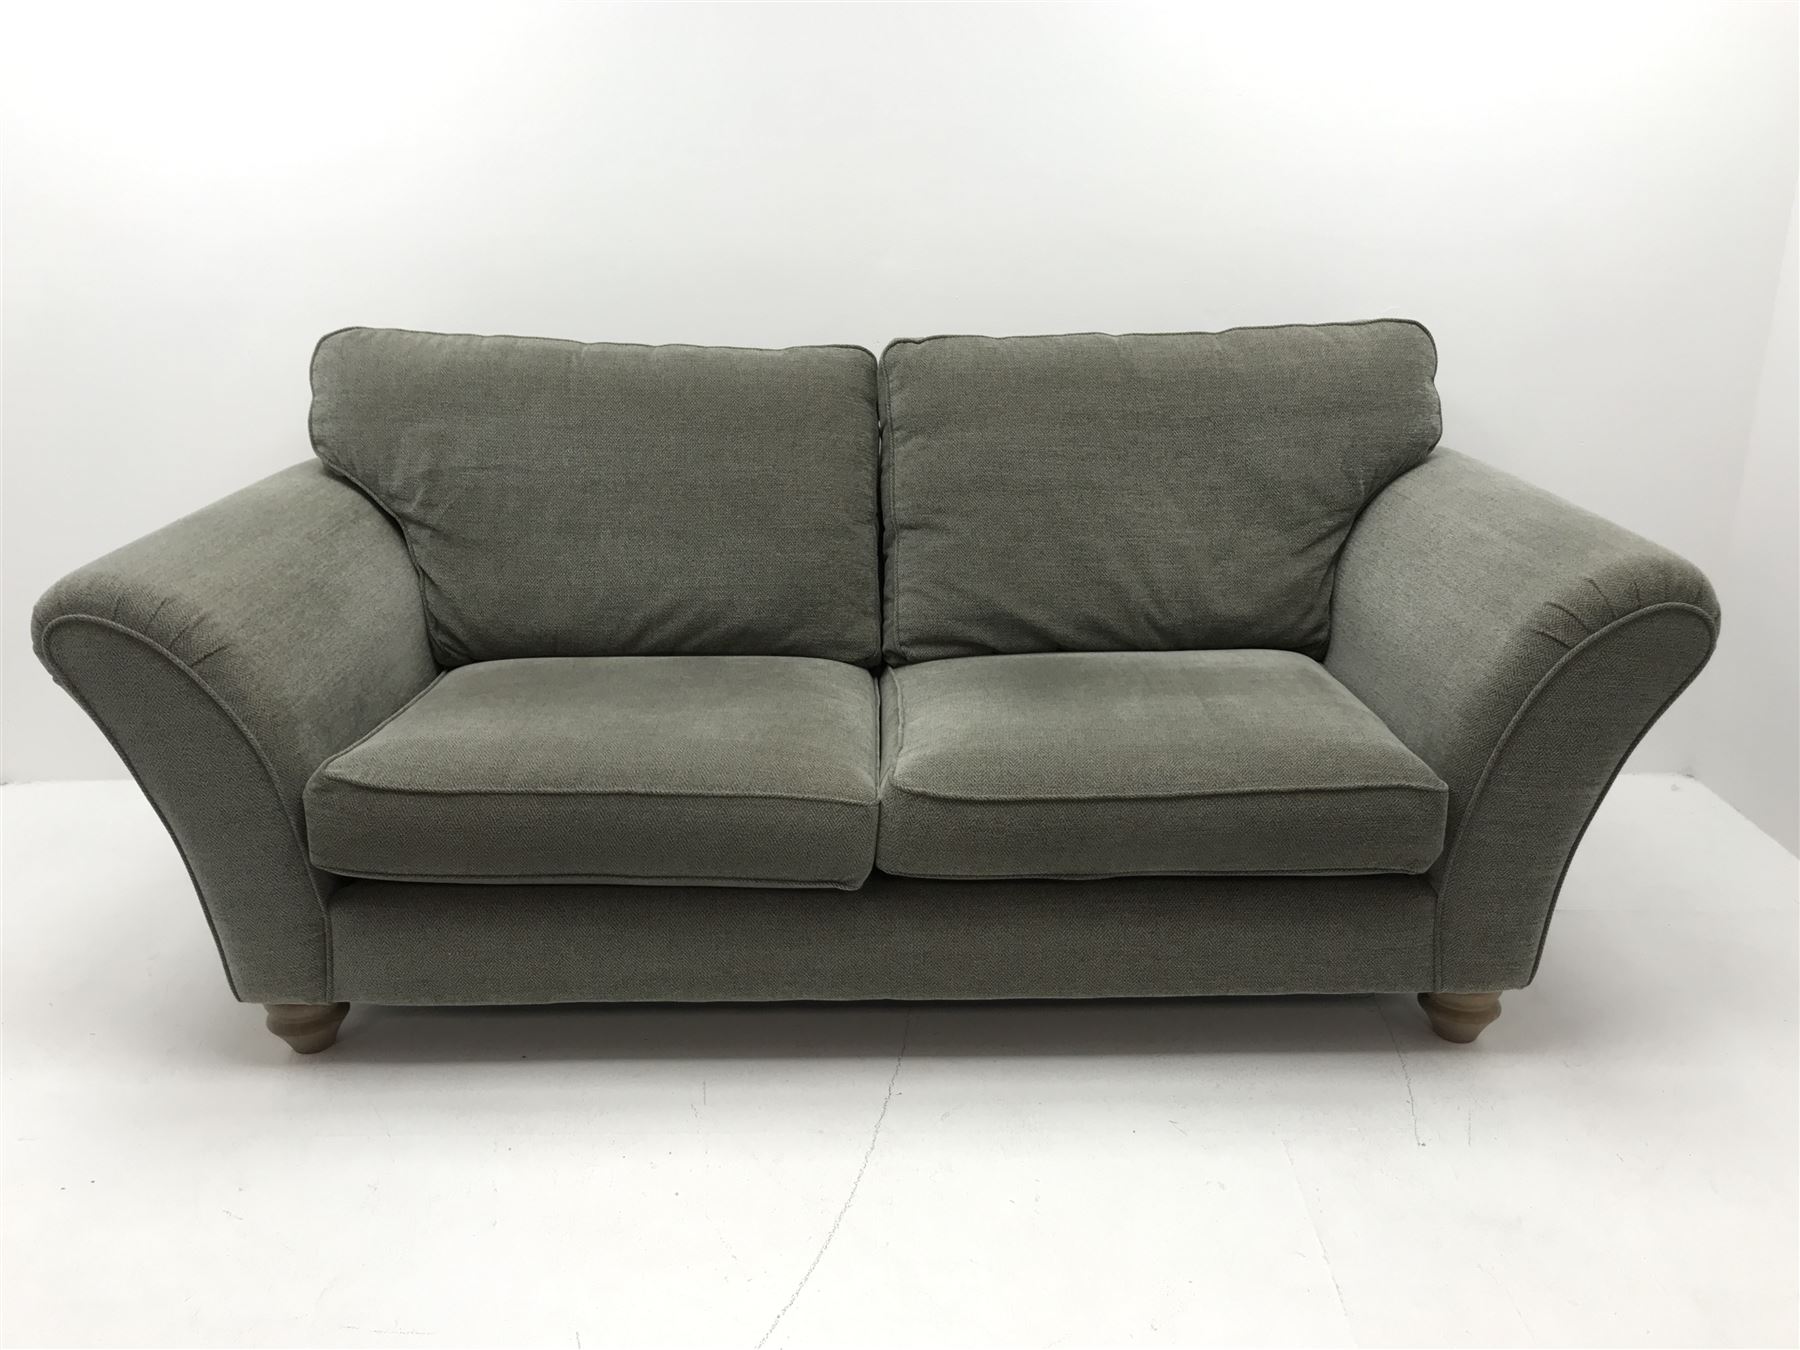 Aspen three seat sofa upholstered in a tweed style fabric